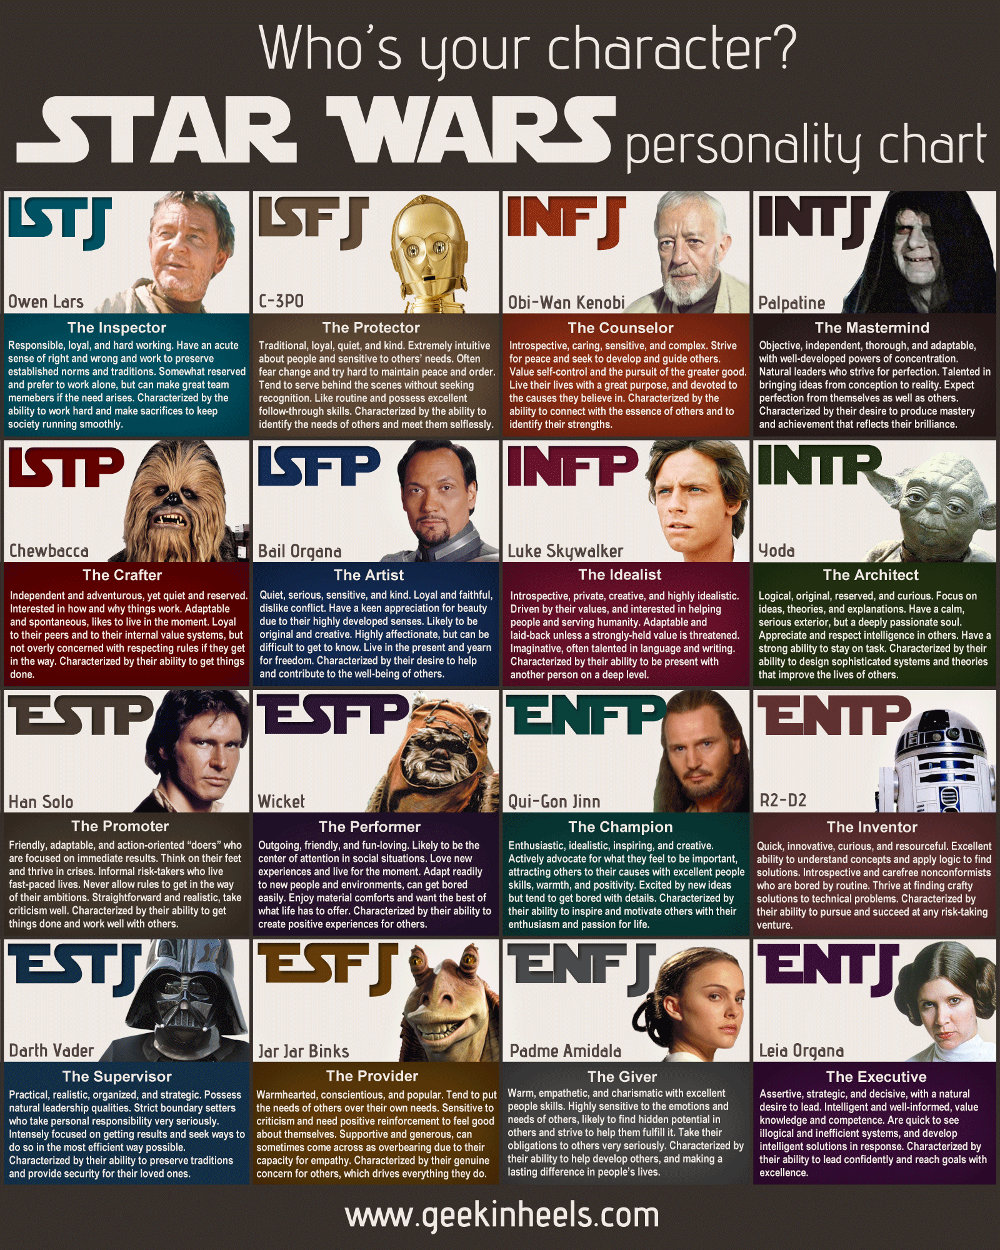 MBTI Personalities of Famous Literary Characters - Part Two - Bookstr